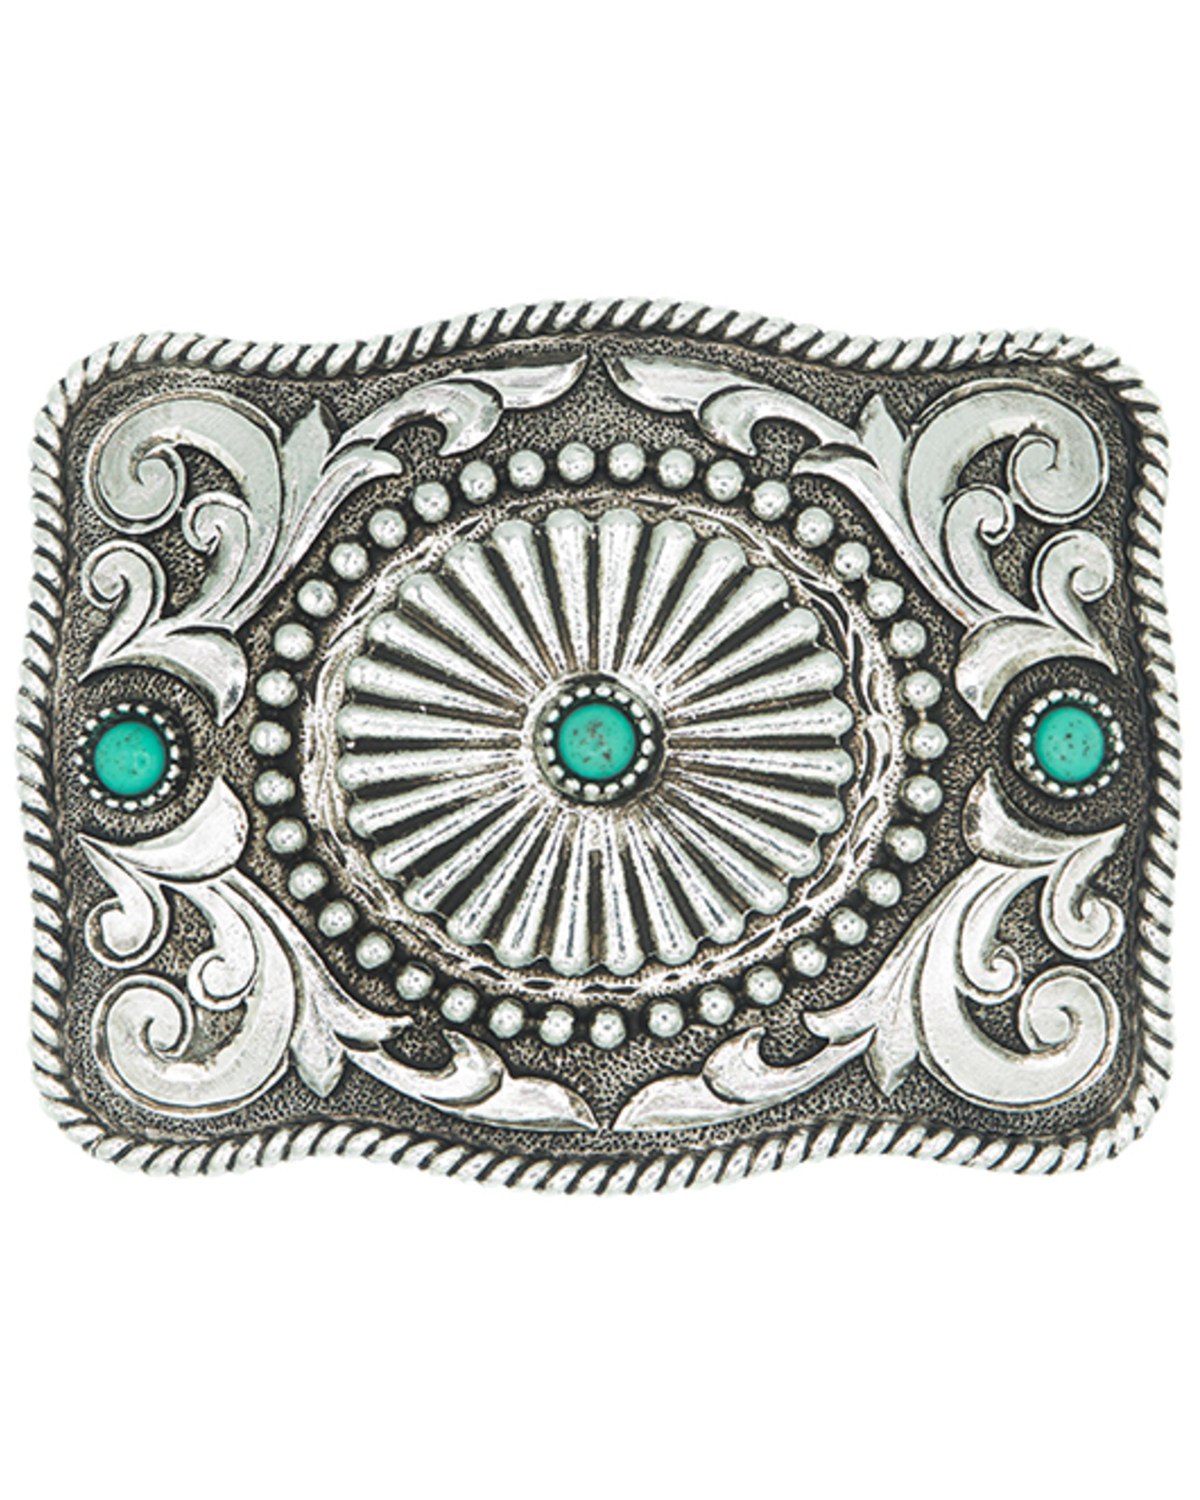 AndWest Etched Concho & Turquoise Belt Buckle